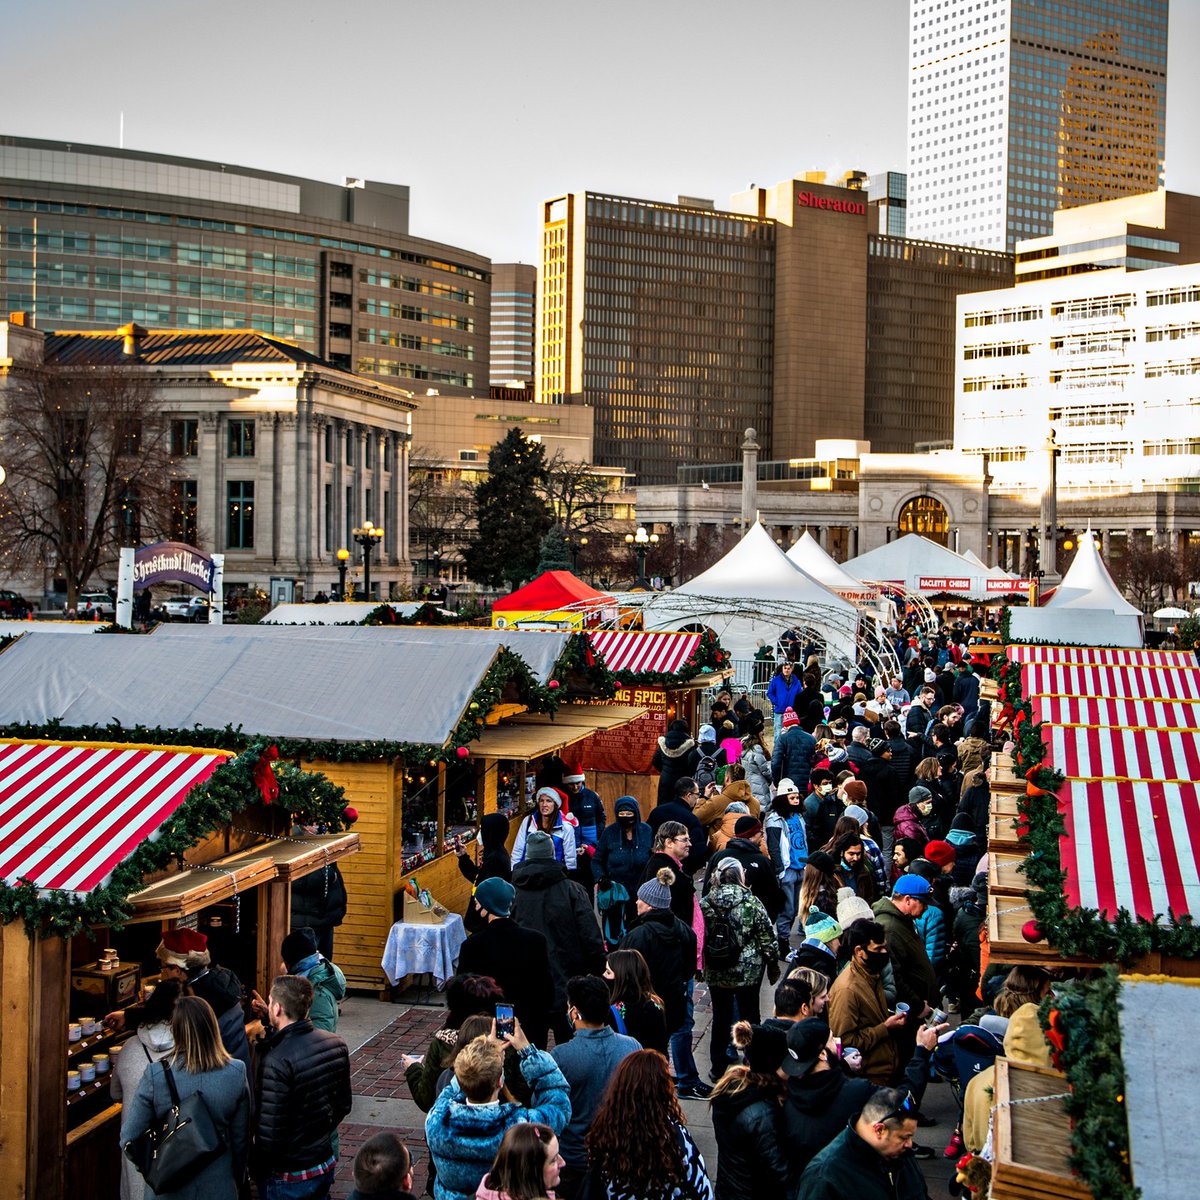 Get your Christmas shopping done, but make it fun! These holiday markets will have something for everyone on your list (naughty or nice!): bit.ly/3XIN3wr 📸: denverchristkindlmarket